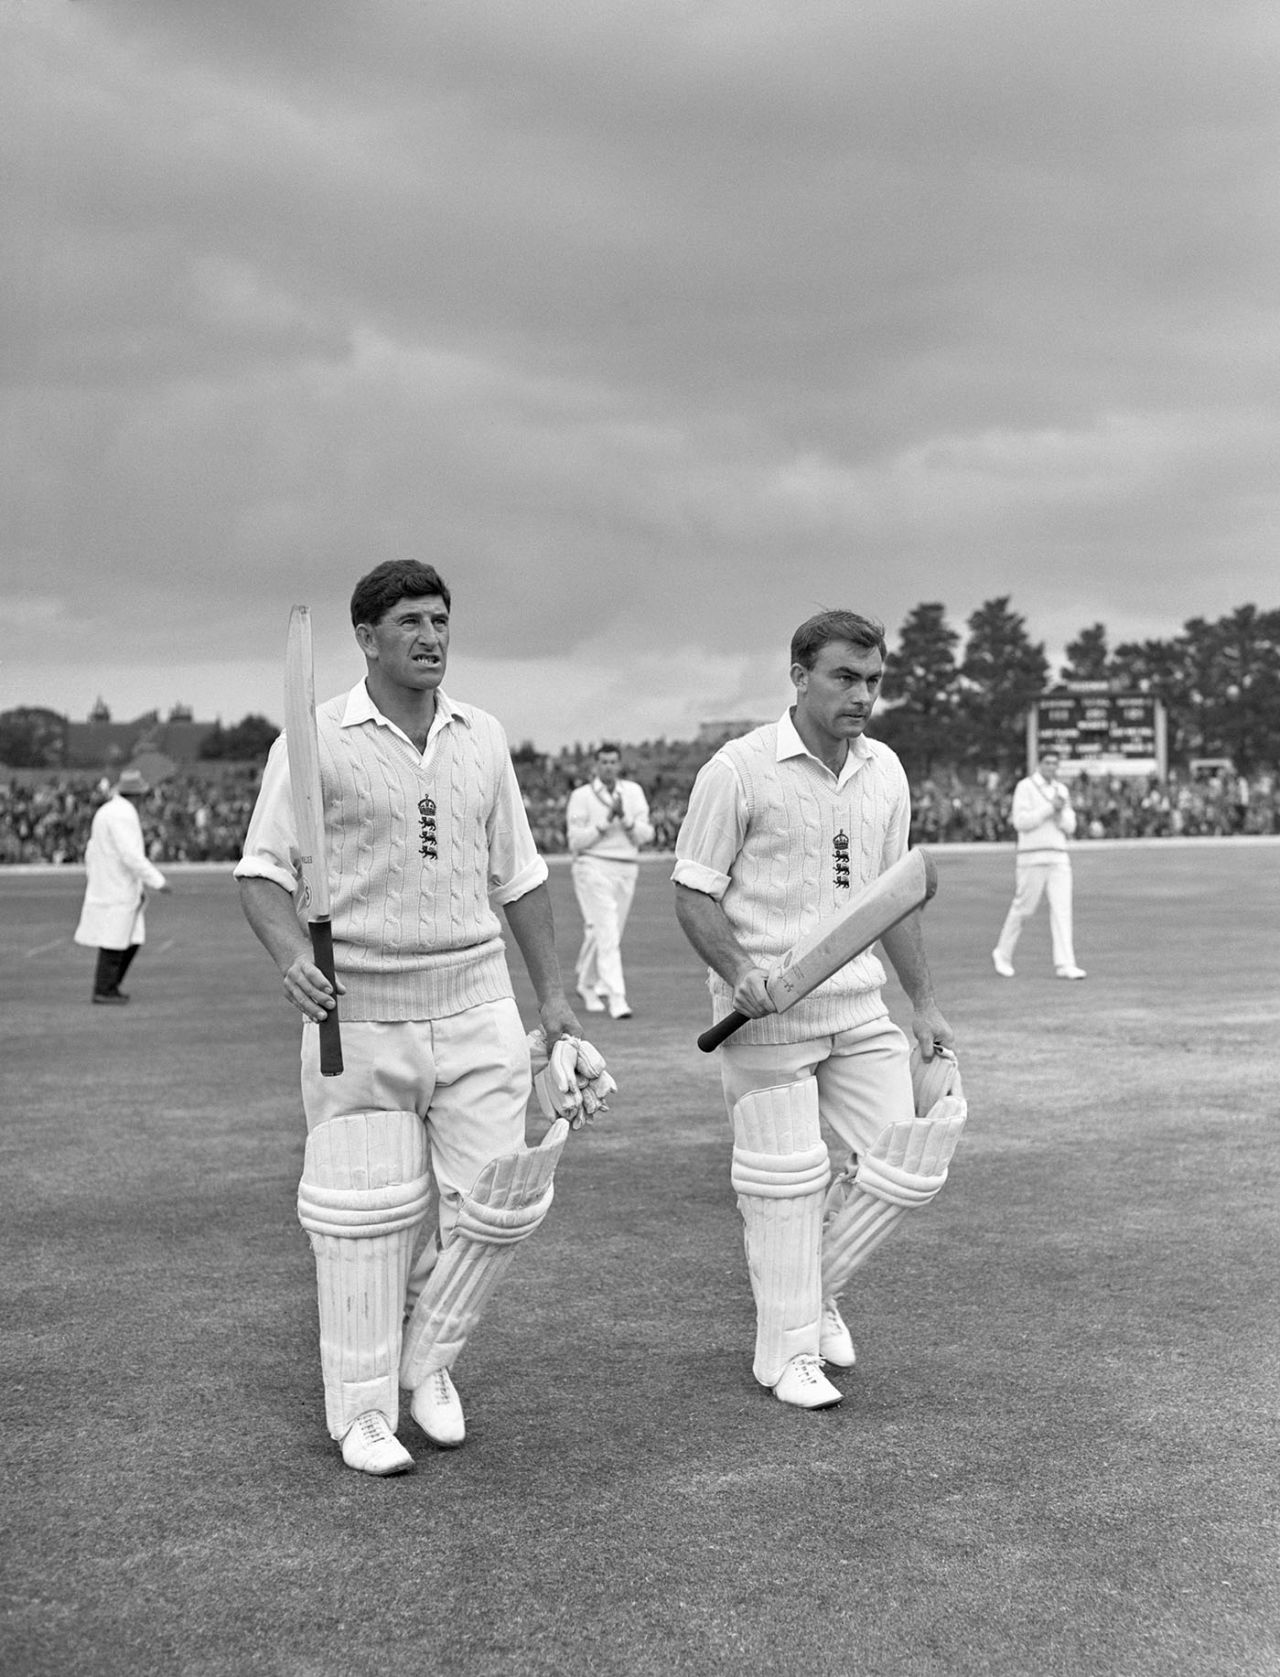 John Edrich (right) walks off next to Ken Barrington during his innings of 310 not out, England v New Zealand, 3rd Test, Headingley, July 8, 1965